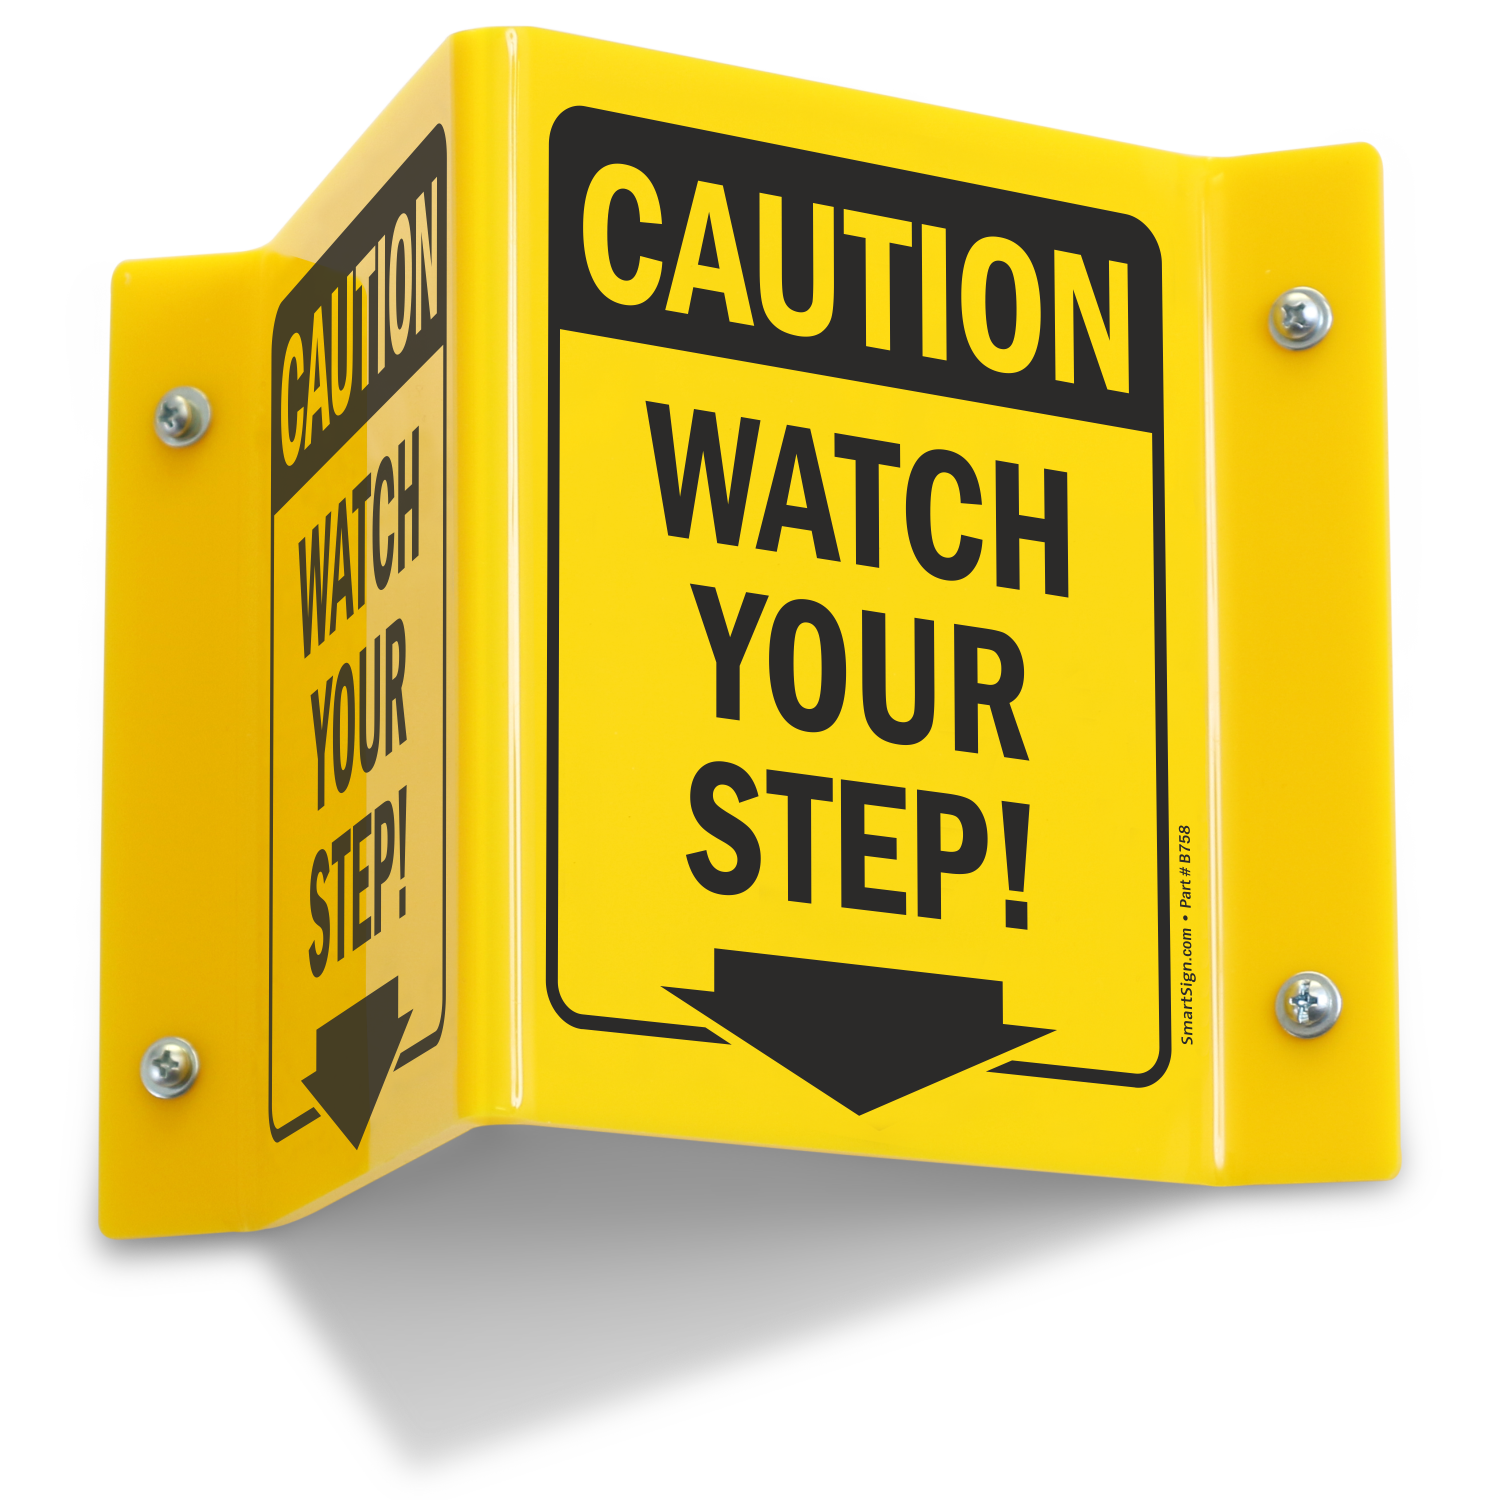 caution-watch-your-step-symbol-sign-vector-illustration-isolated-on